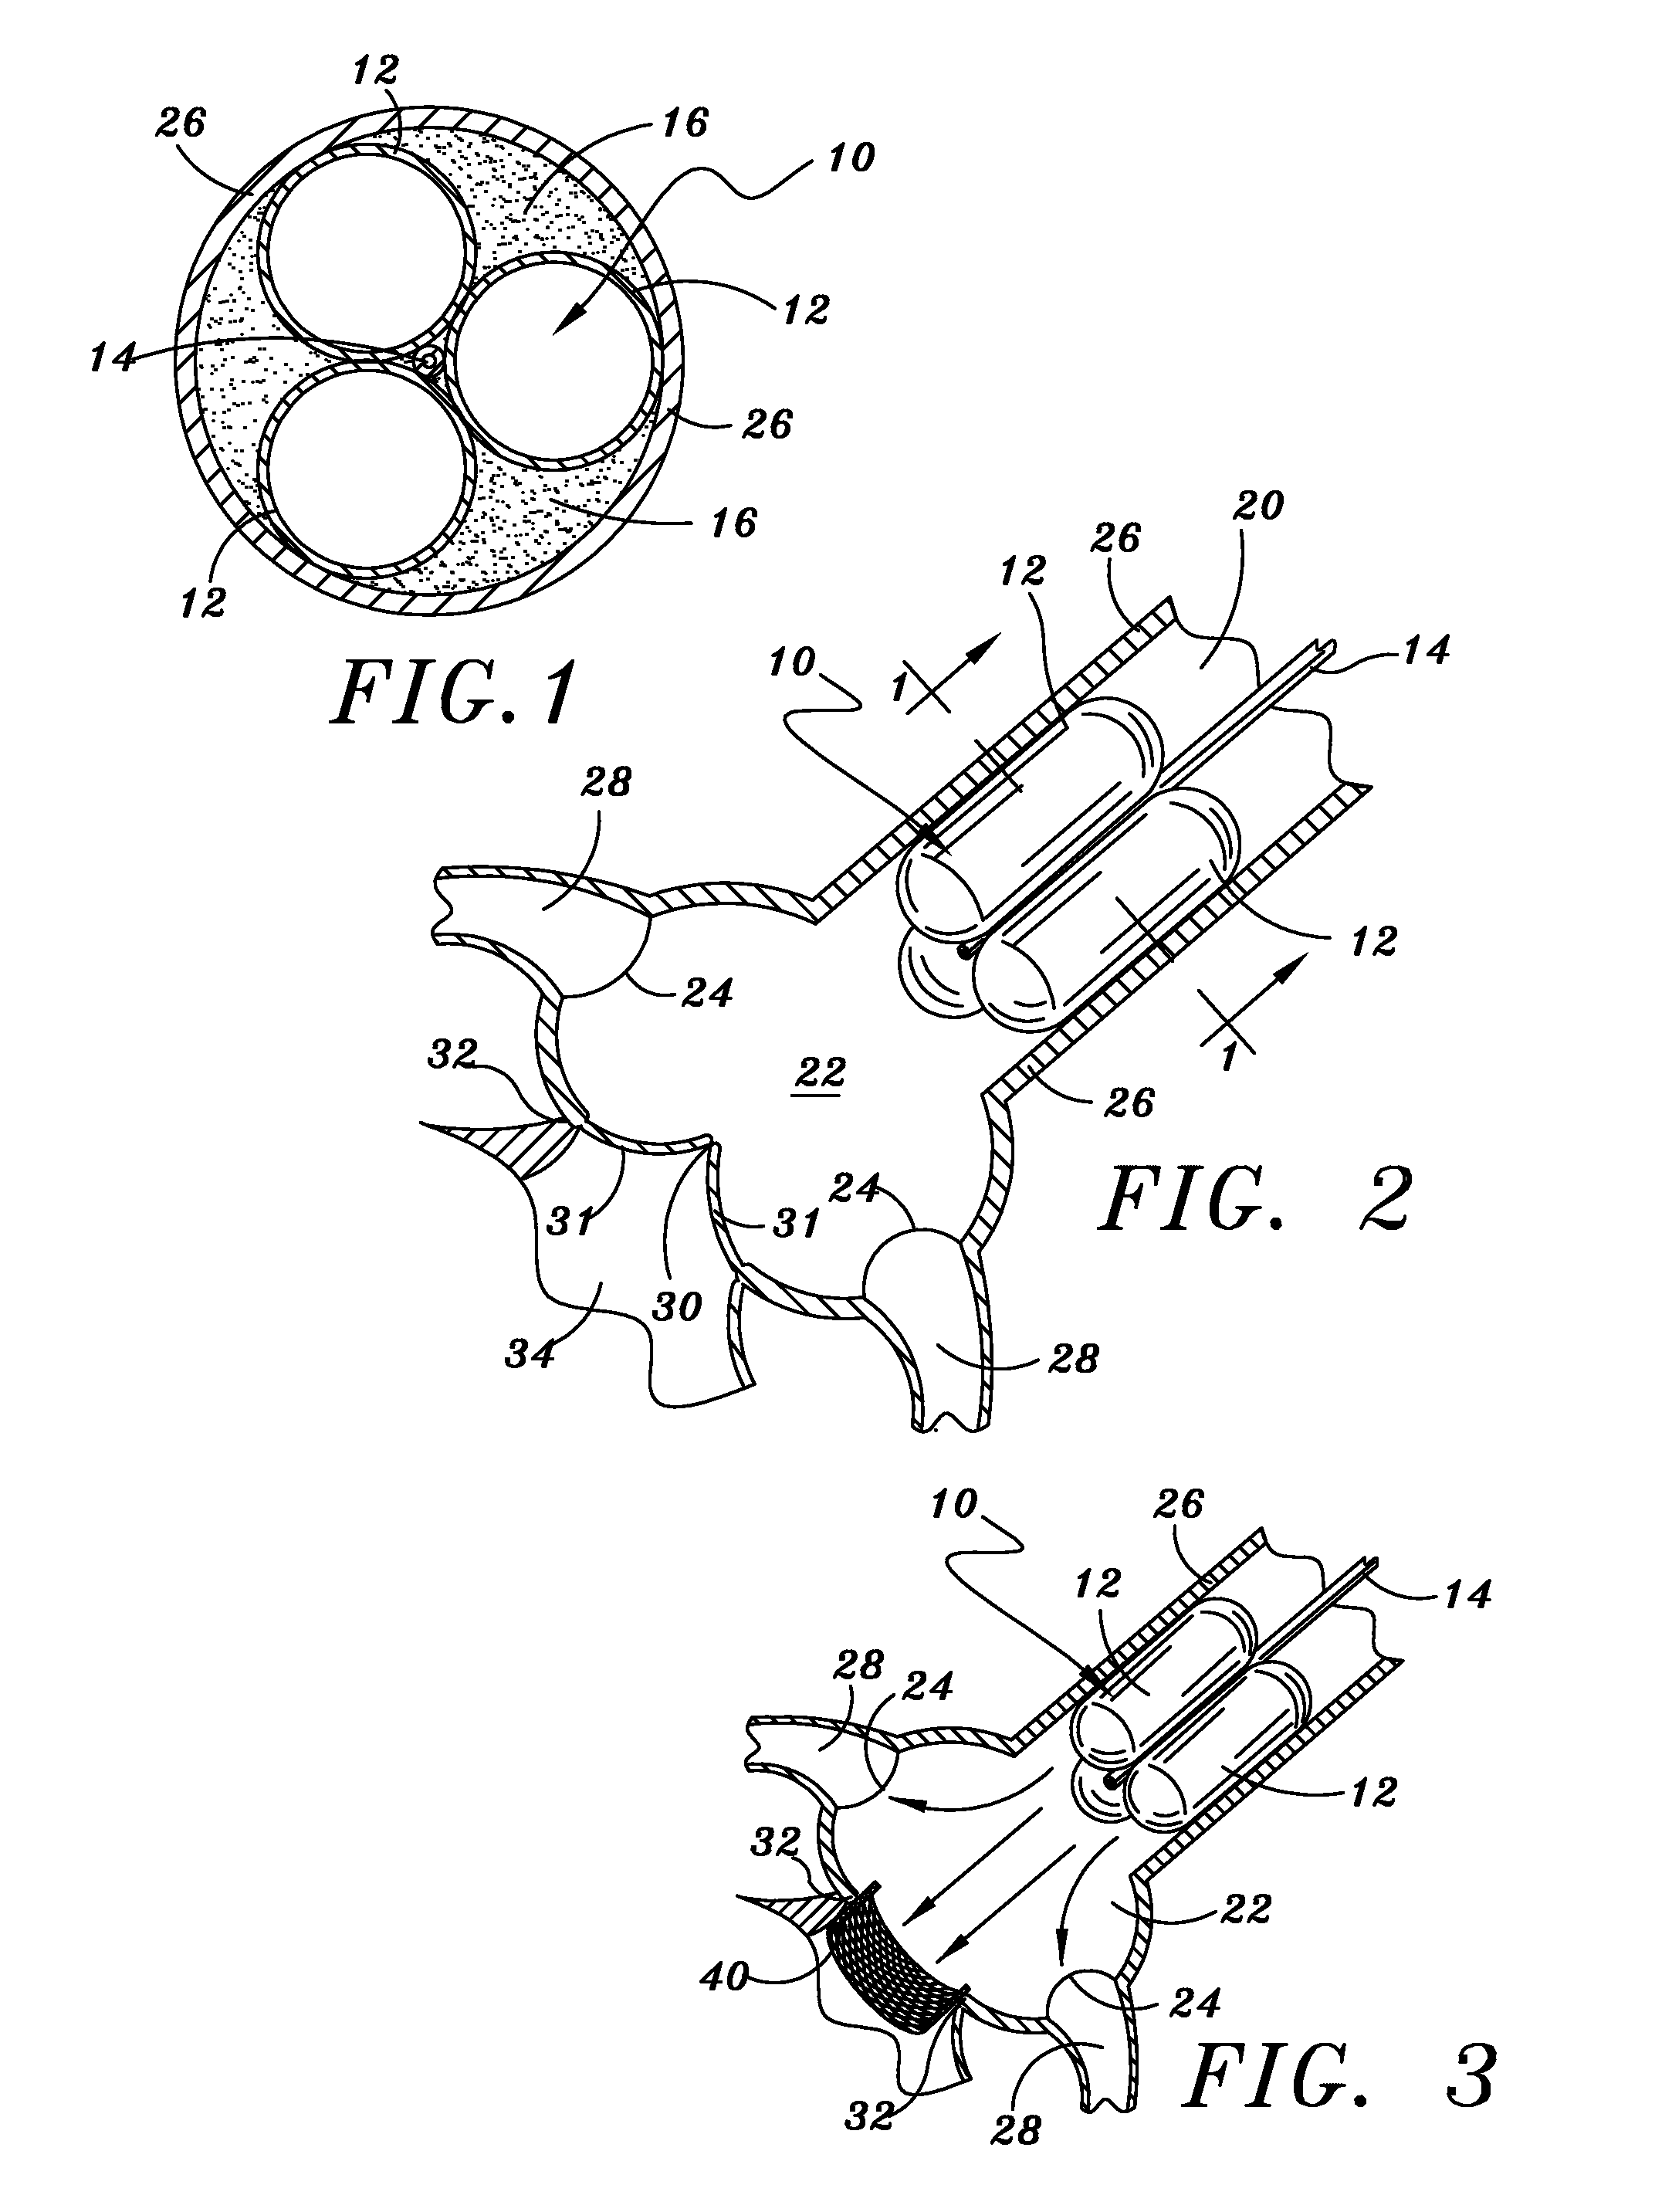 Method and Apparatus for Percutaneous Aortic Valve Replacement